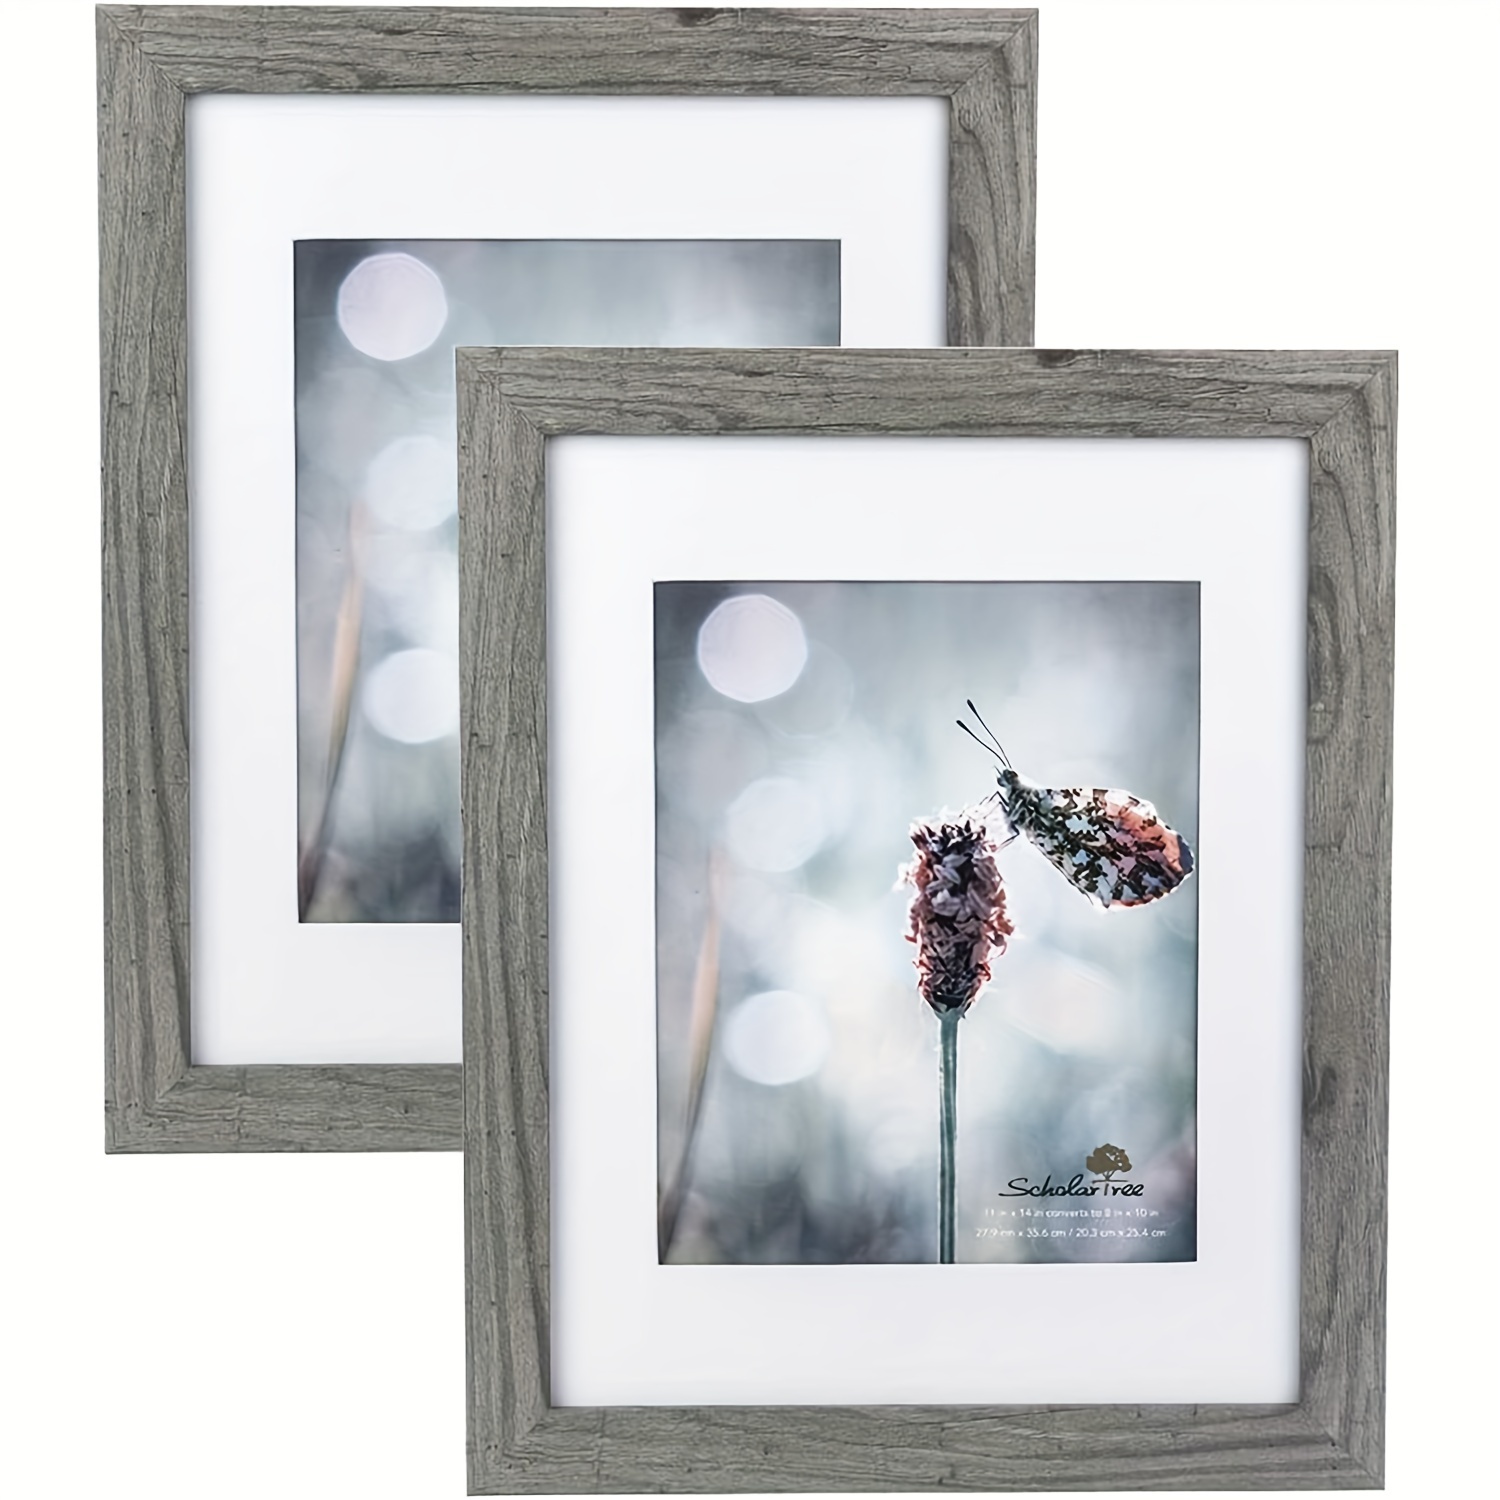  Picture Frame 11x14 Set of 6, 11 x 14 Wood Frame Matted to  8x10, Natural Oak Wood Photo Frames 11 by 14 with Tempered Glass, 11x14  Wall Collage Picture Frame for Home Decor